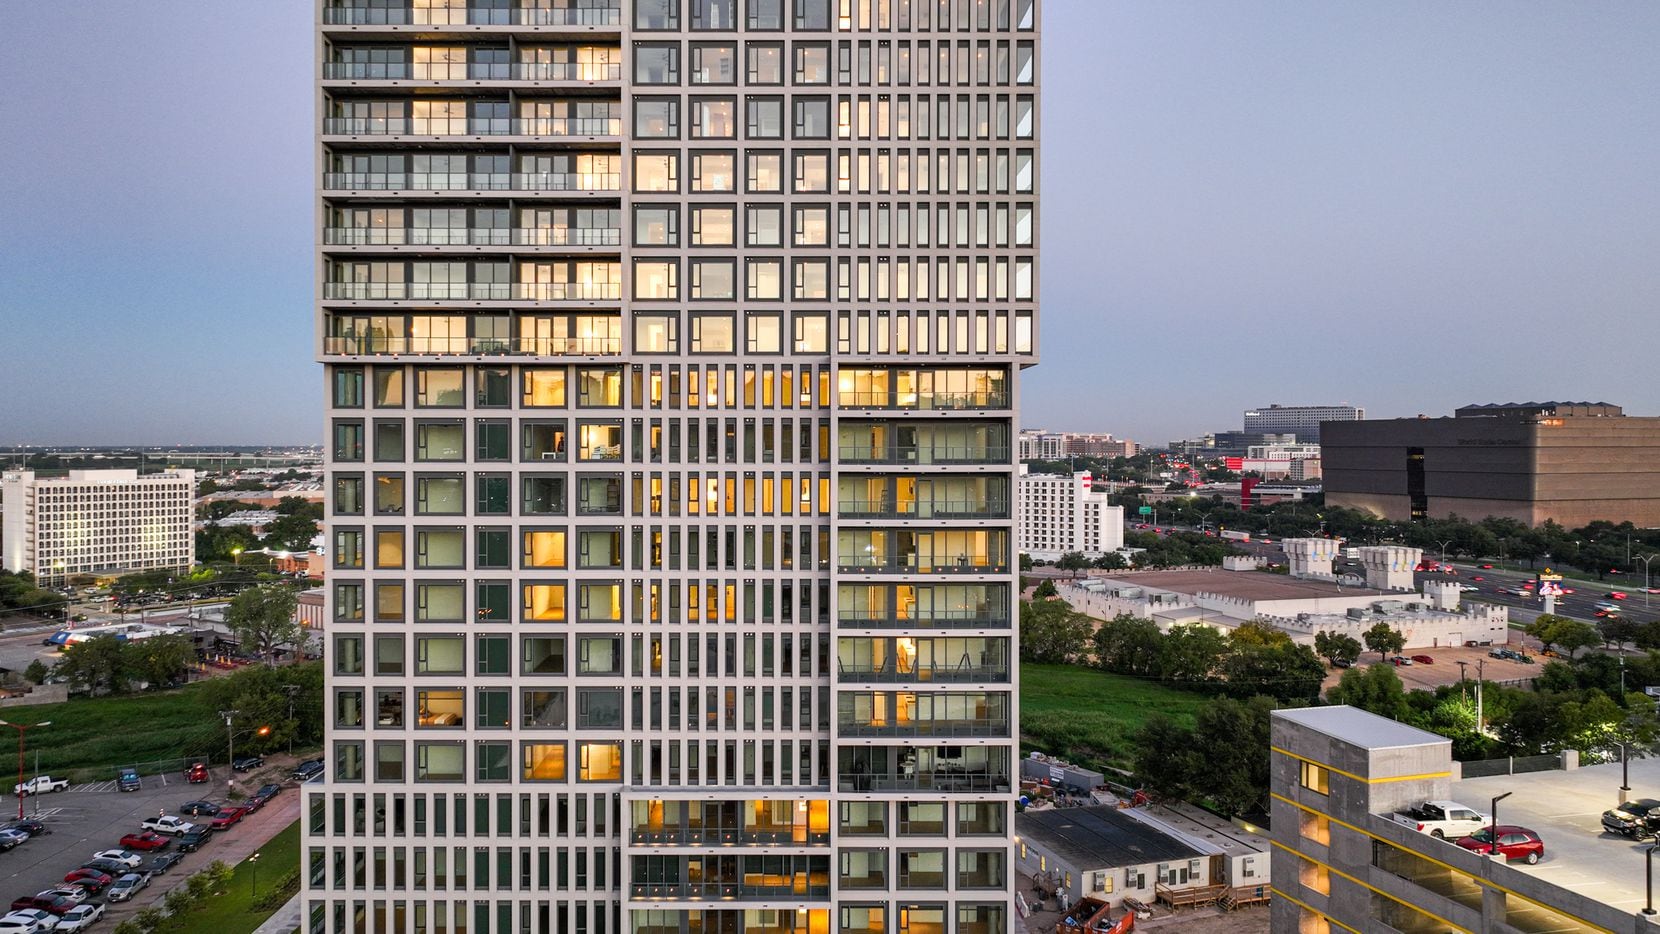 The first Urby tower has already opened in the Design District.